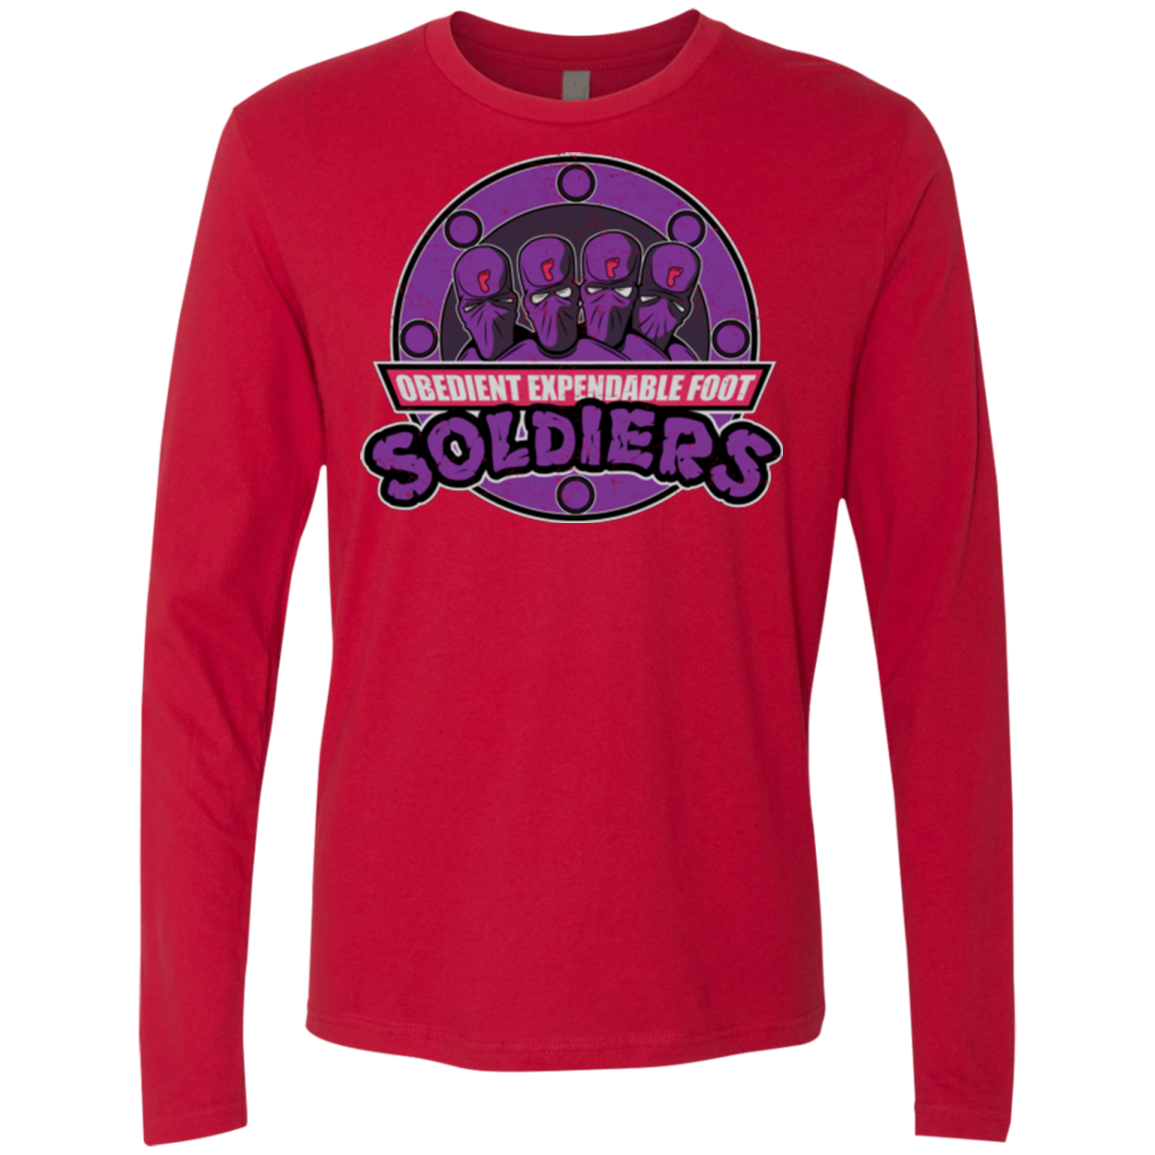 OBEDIENT EXPENDABLE FOOT SOLDIERS Men's Premium Long Sleeve